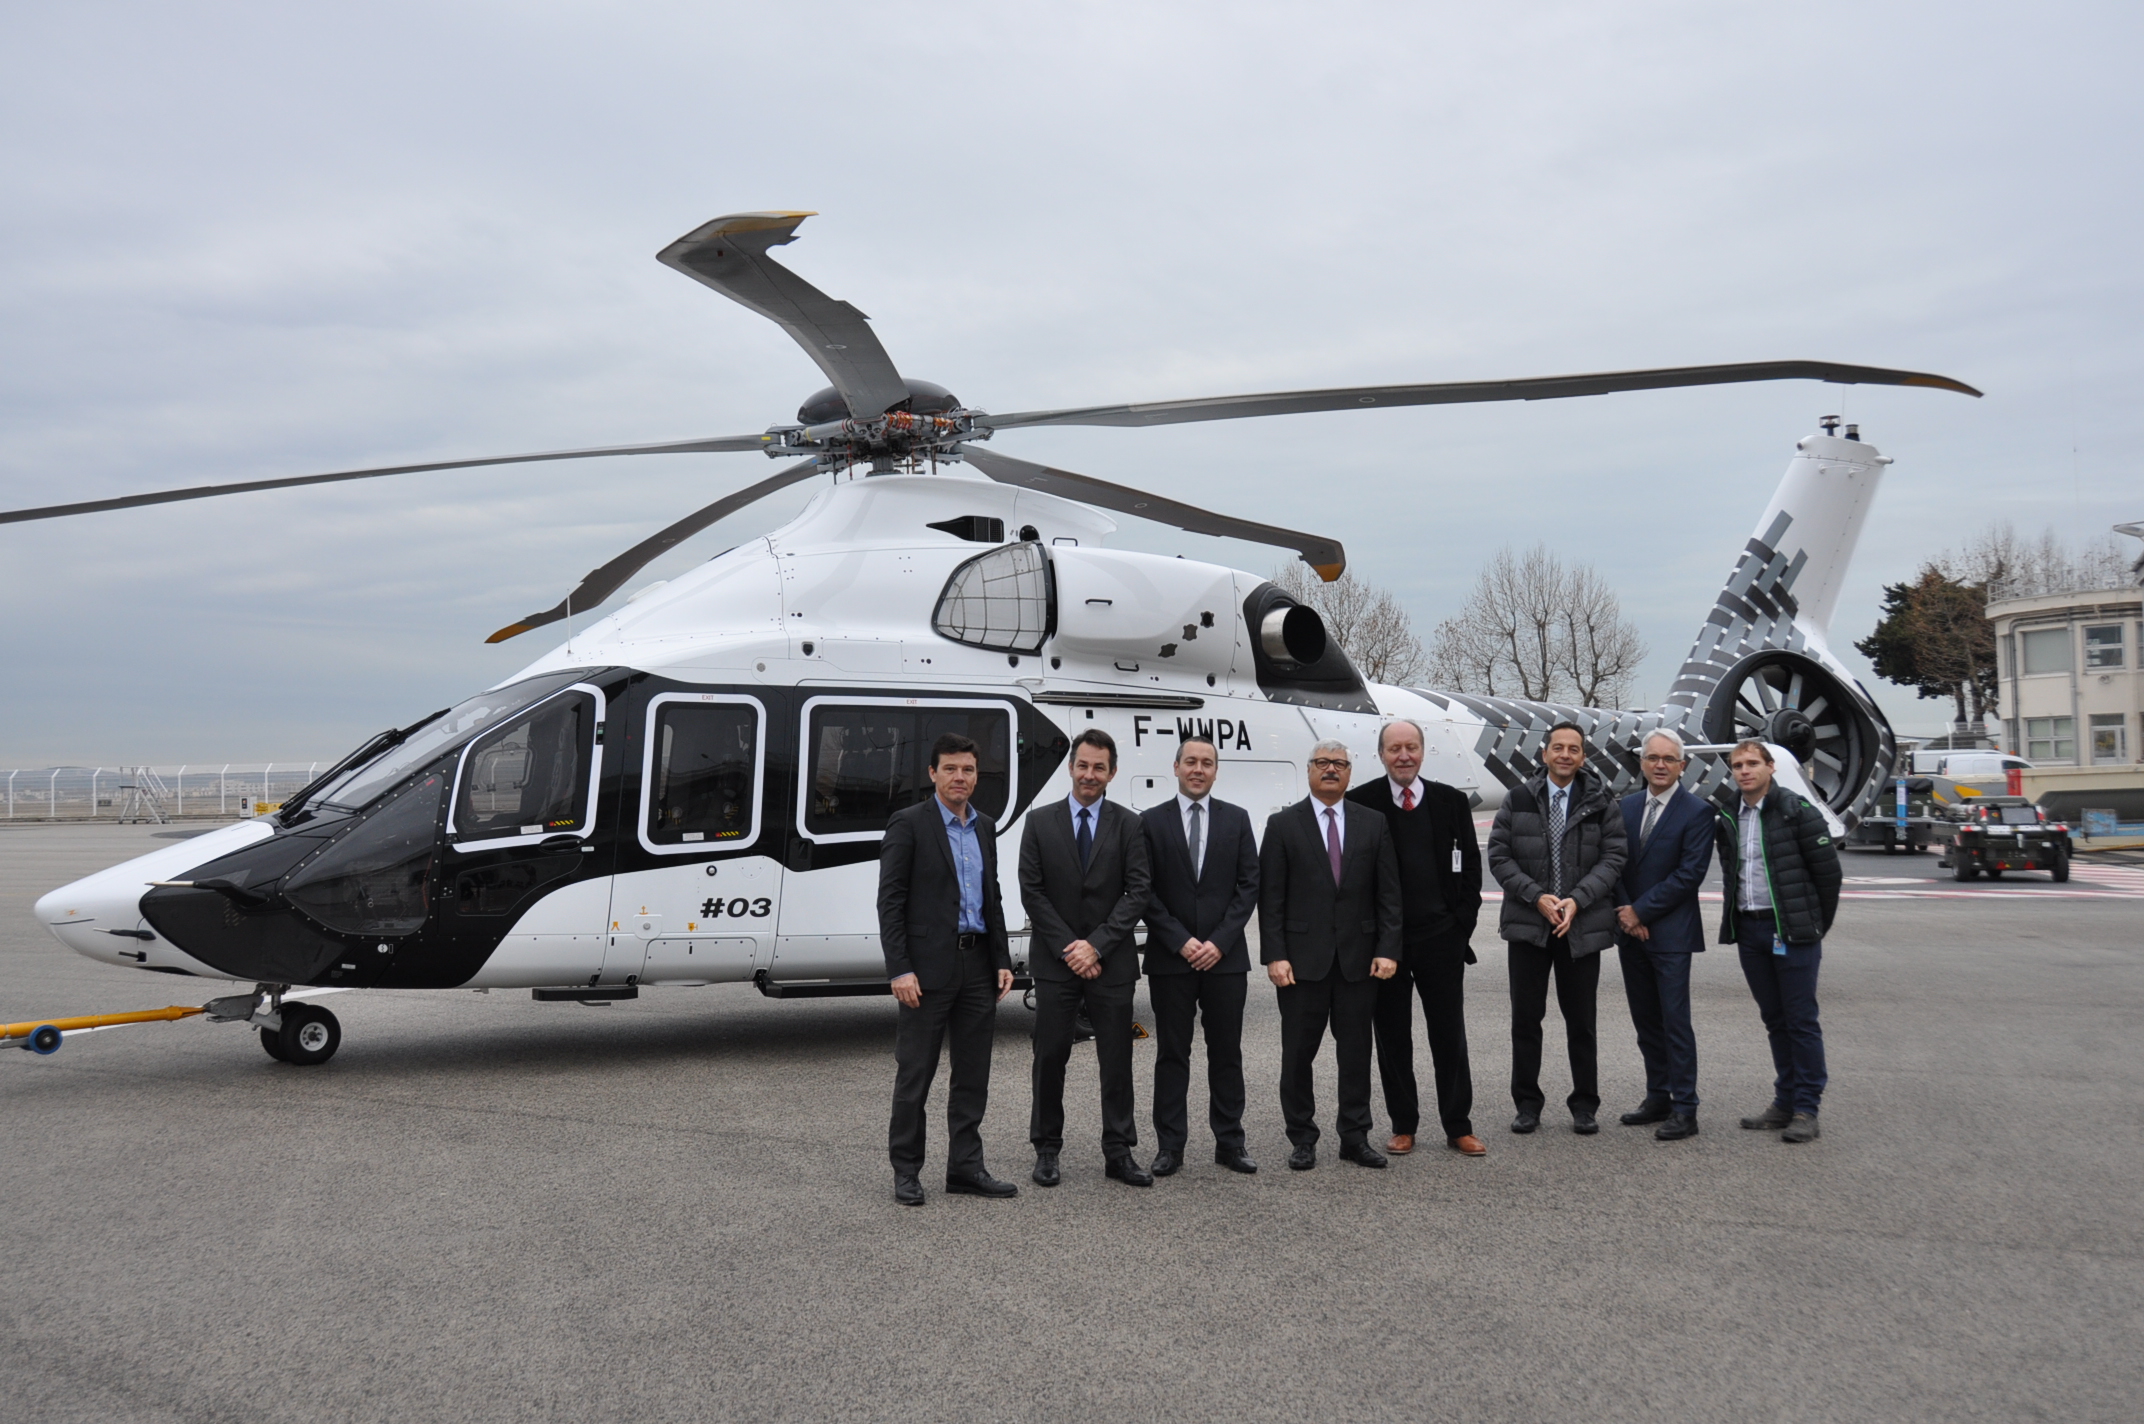 The A350 XWB has a structure that is 53% composites. From left to right: Frederic Devenne (Airbus Helicopters), Yvan Arnaudier (Hexcel),  Mathieu Bonnafoux (Hexcel), Gerard Chekherdemian (Hexcel), Jobst Queckboerner (Hexcel), Matthias KOENIG (Airbus Helicopters), Frederic Bozek (Hexcel), Guillaume Massé (Airbus Helicopters).